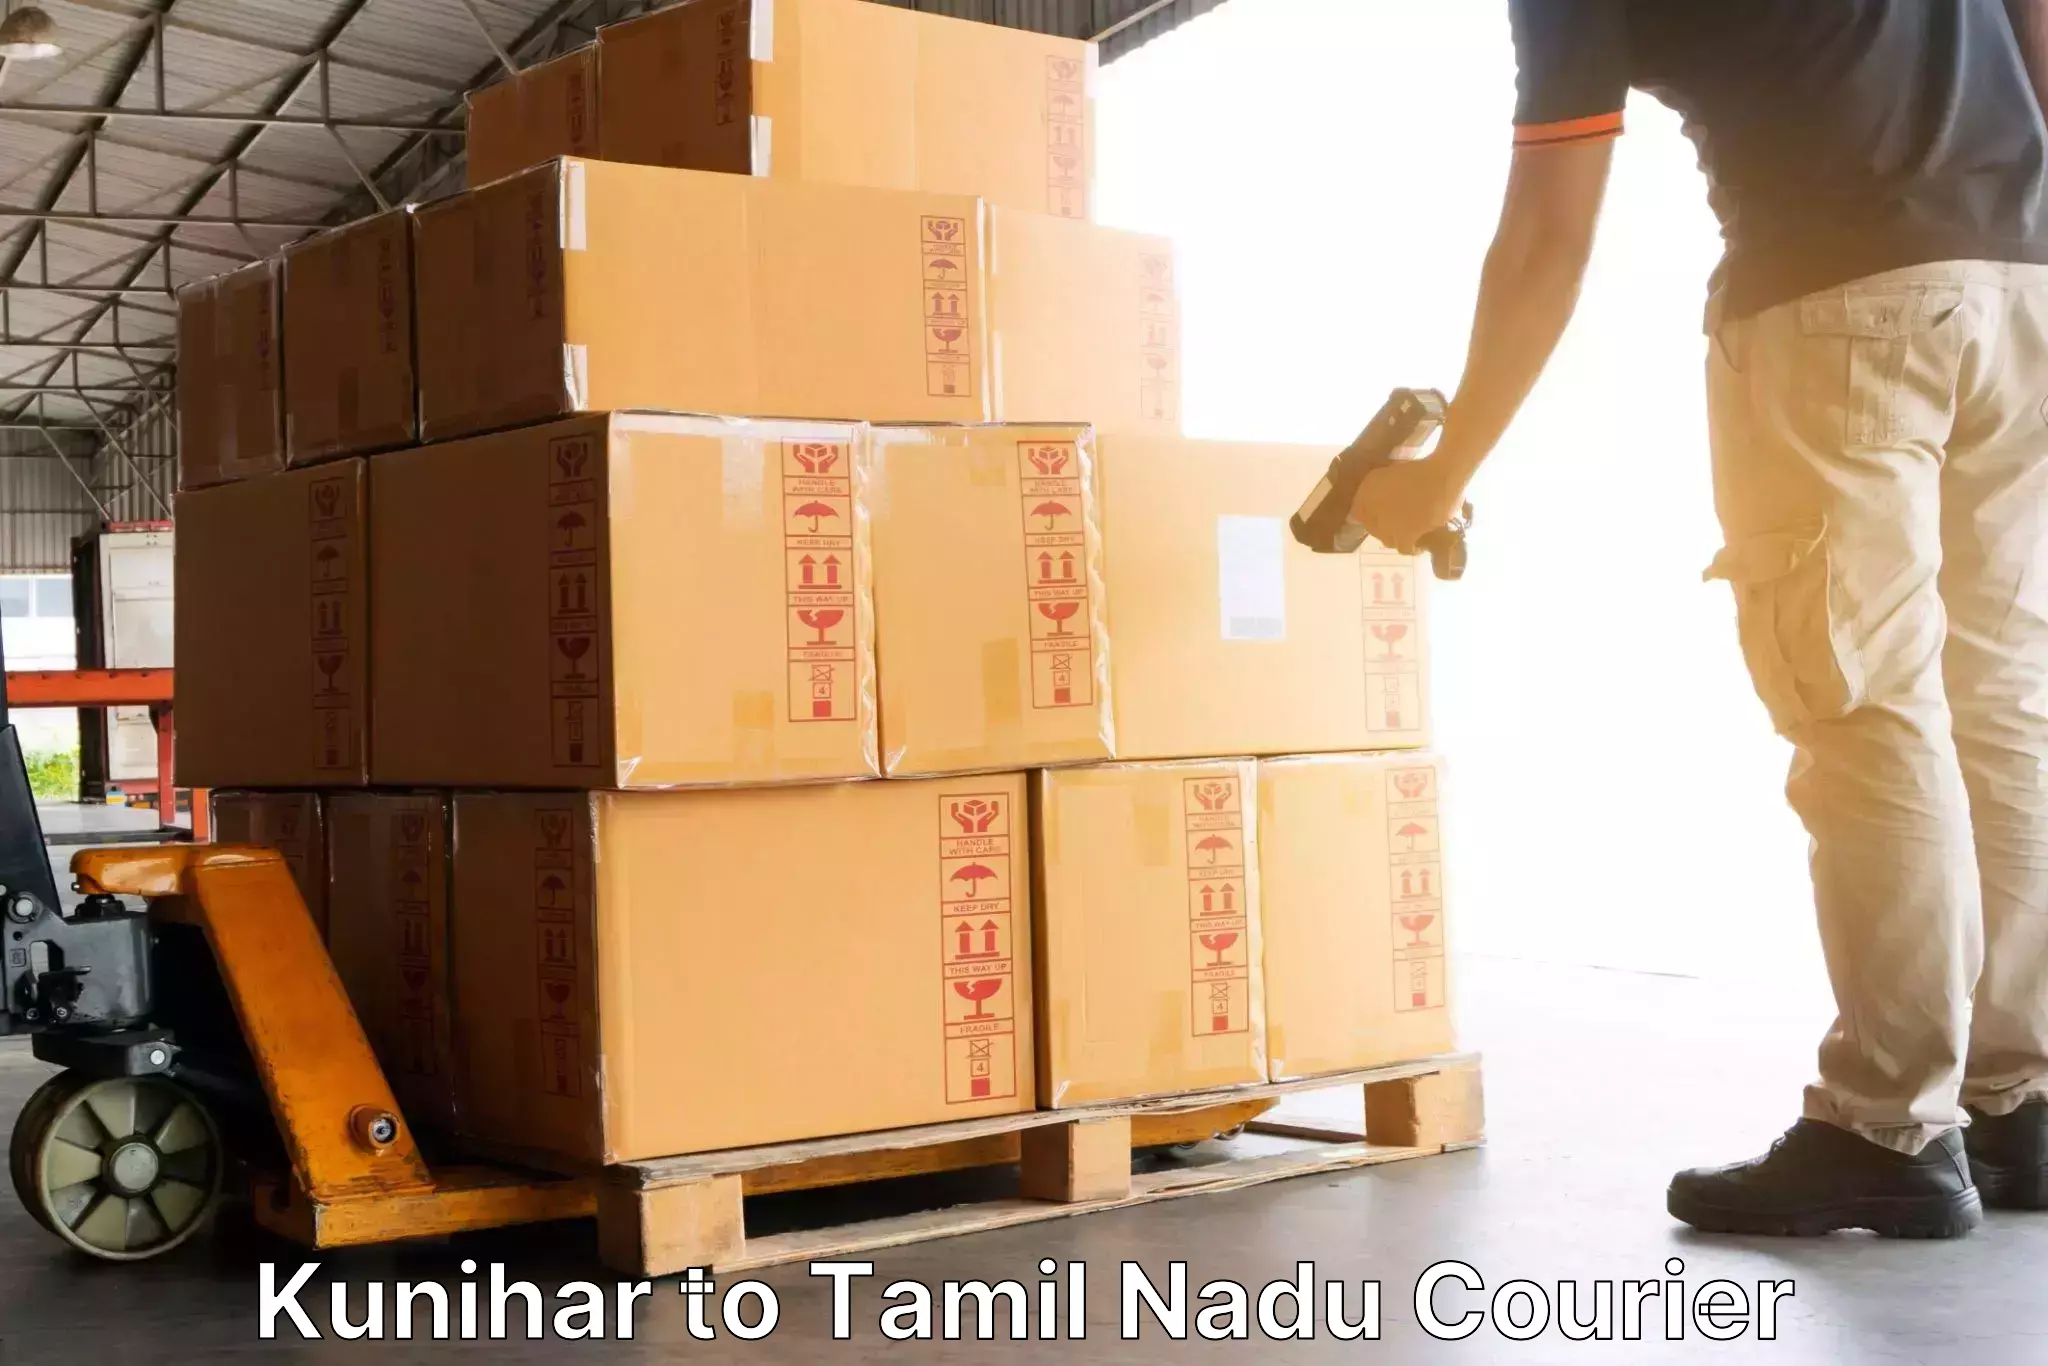 Subscription-based courier Kunihar to Chennai Port